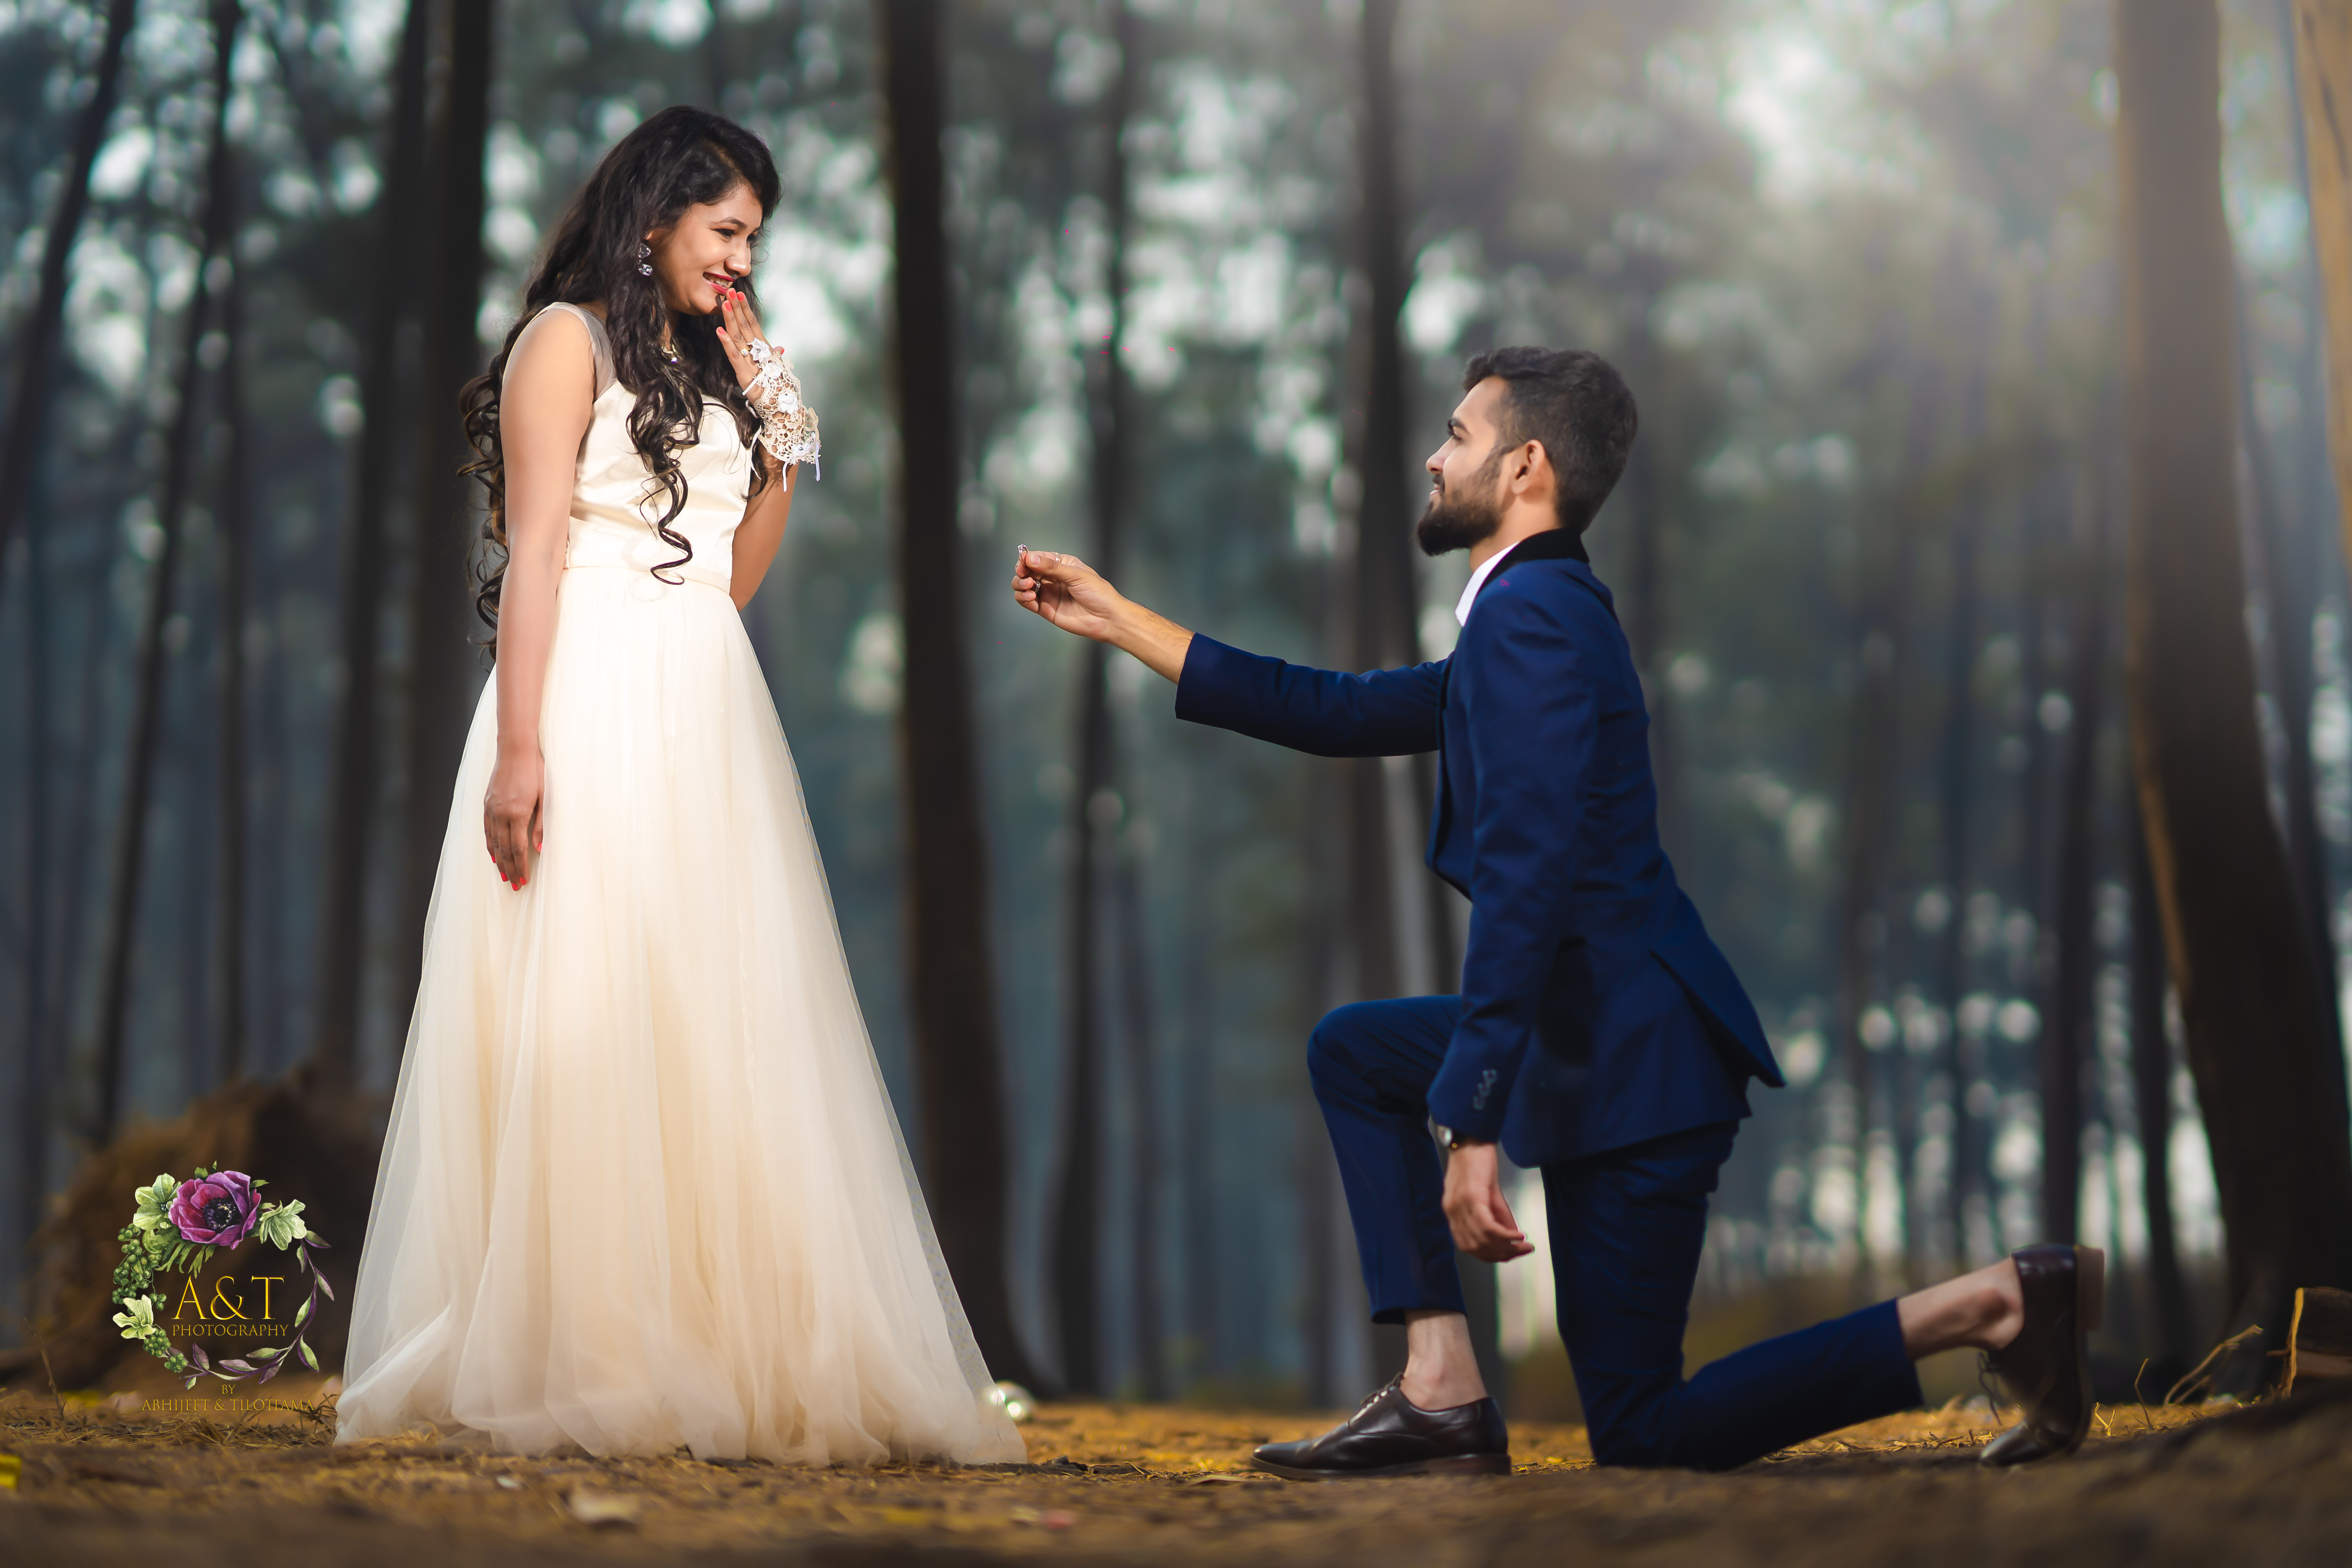 Dharmik Proposing Jinal for Wedding in beautiful lush green forest|Best Wedding Photographer in Pune